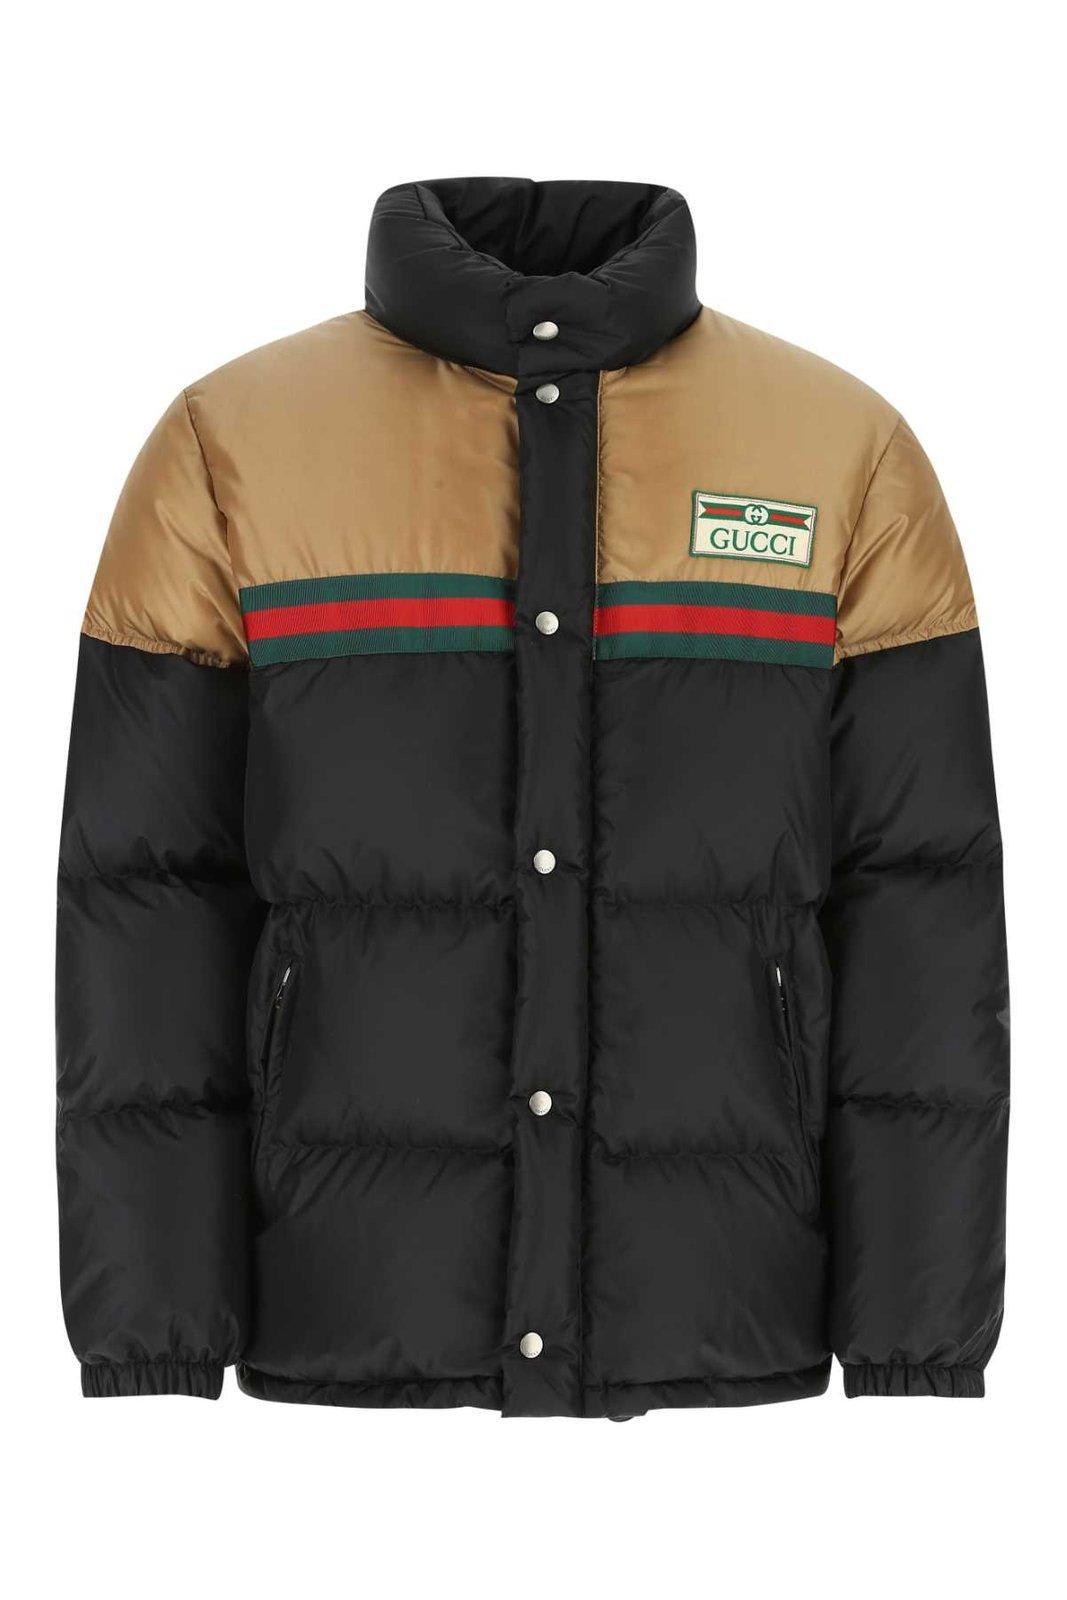 Gucci Logo Patch Down Jacket in Black for Men | Lyst